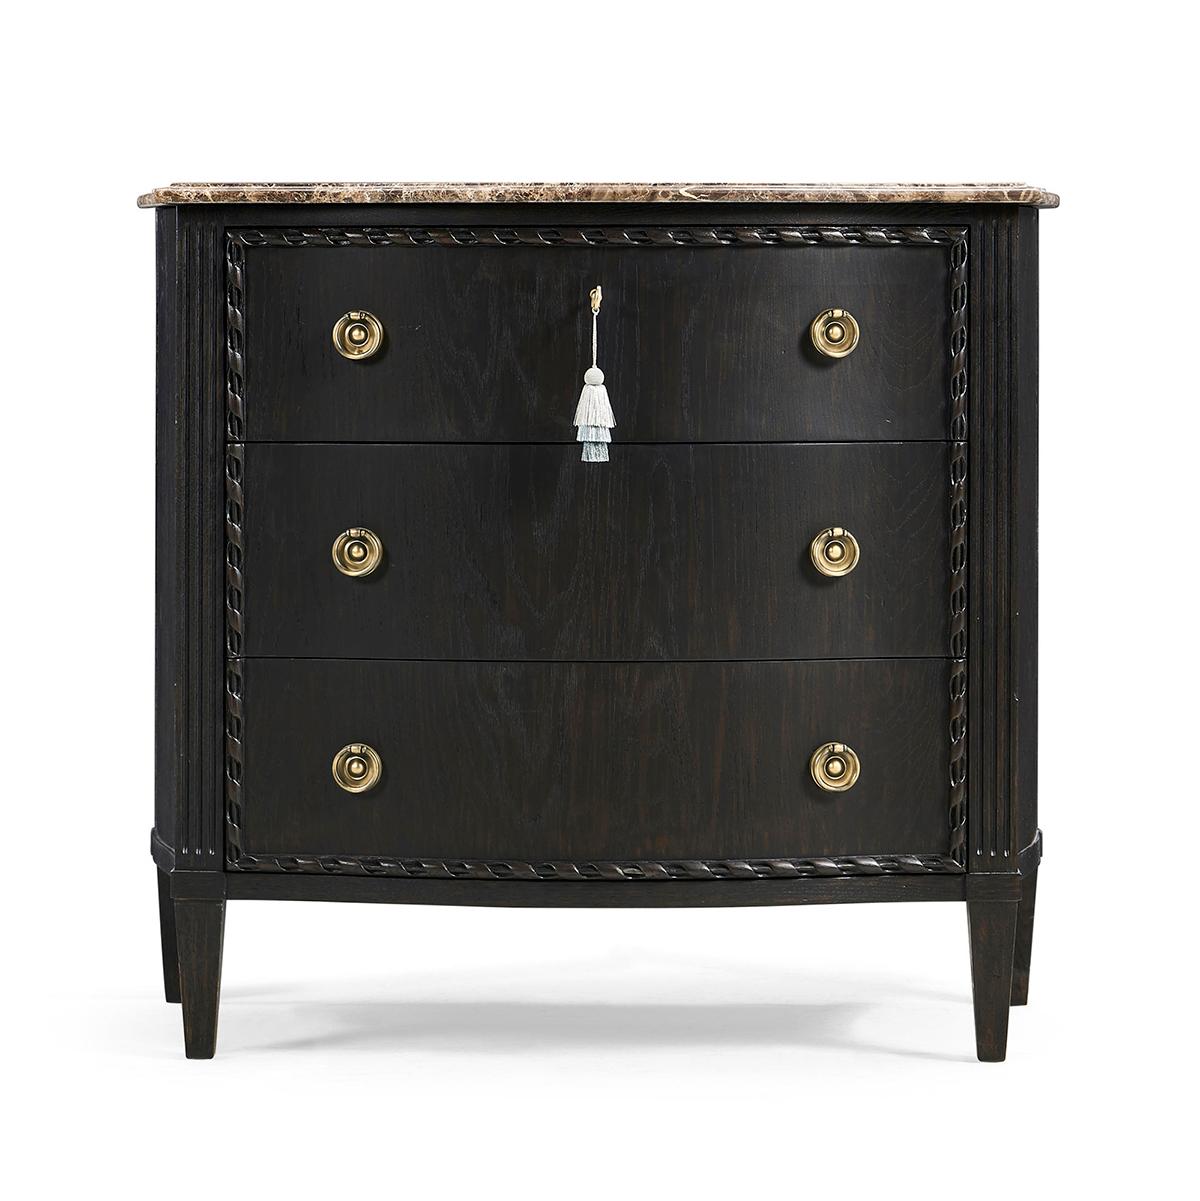 This exquisite chest is an ideal centerpiece for any bedroom or living space, offering both visual splendor and functional utility.

The top of the chest is crafted from honed Emperador stone, known for its durability and natural beauty, which sits